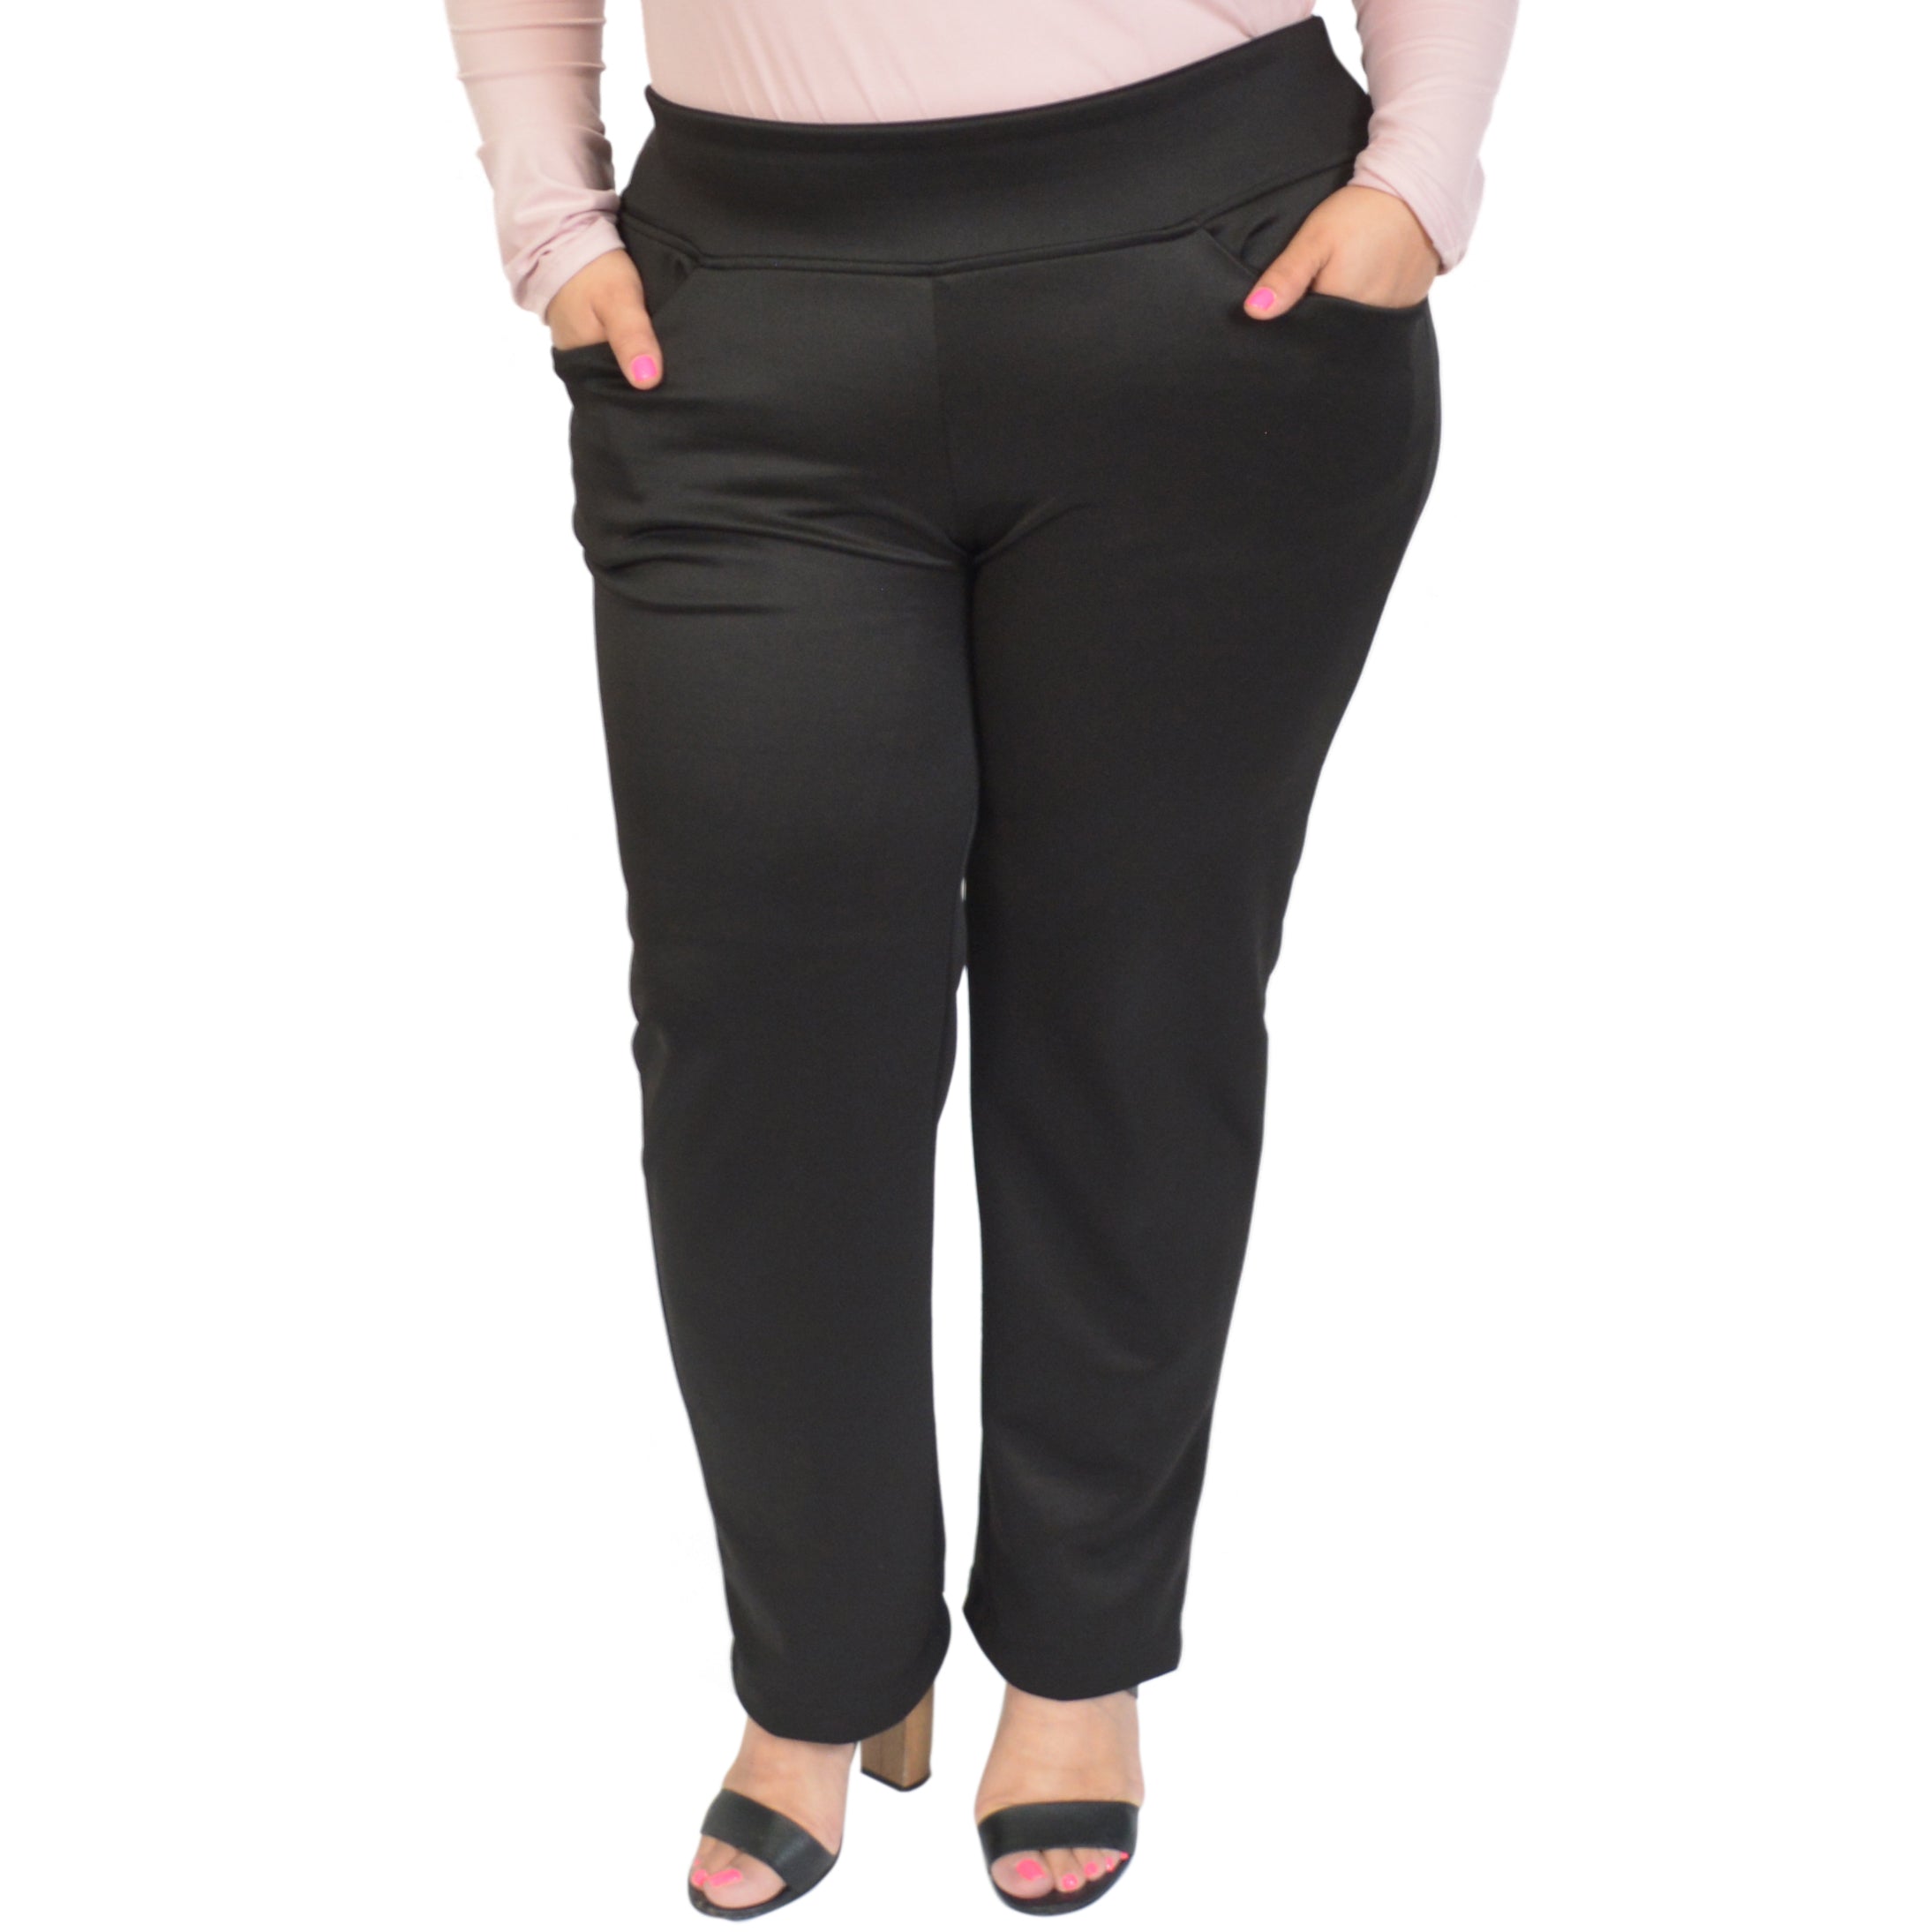 women's plus size pants for work